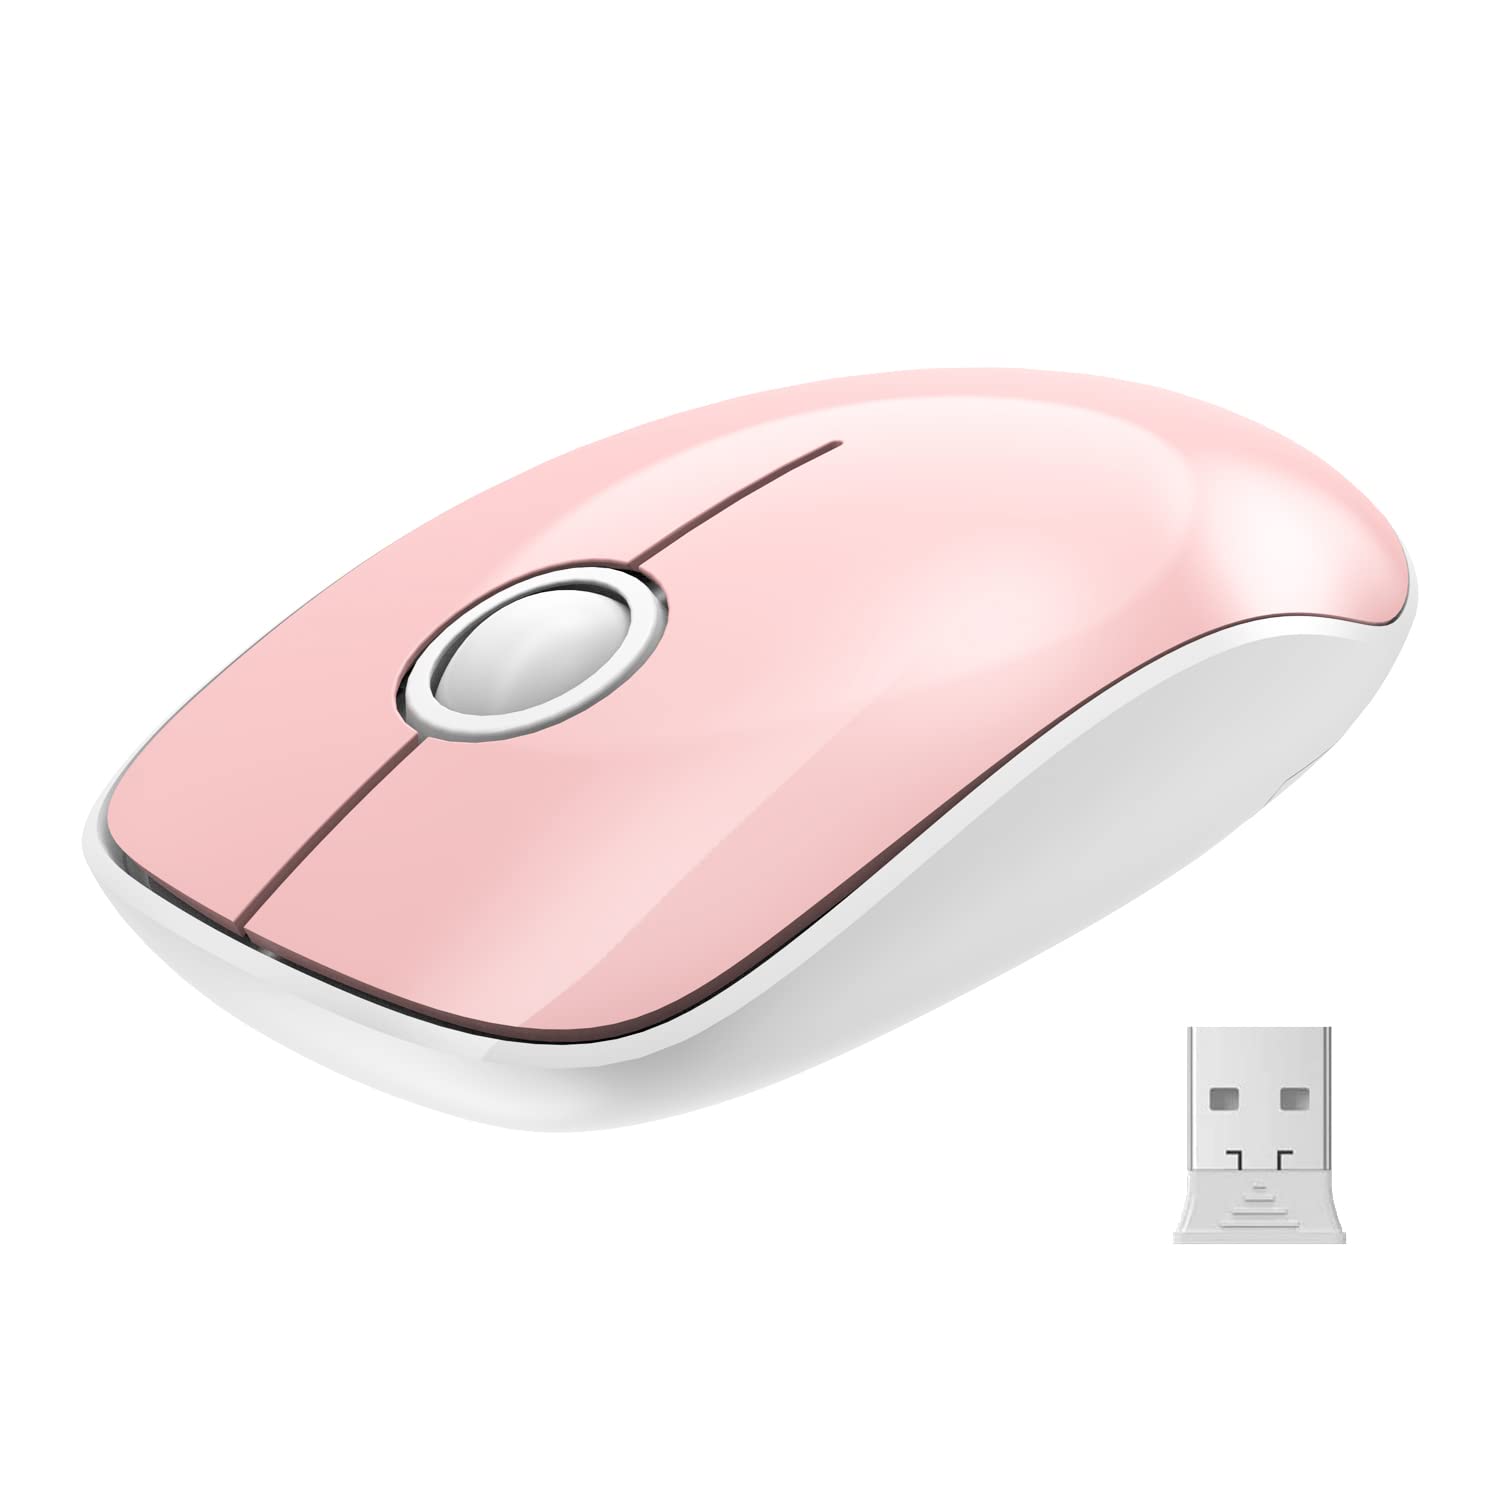 A mouse with fresh batteries and positioned at an optimal distance from the computer.